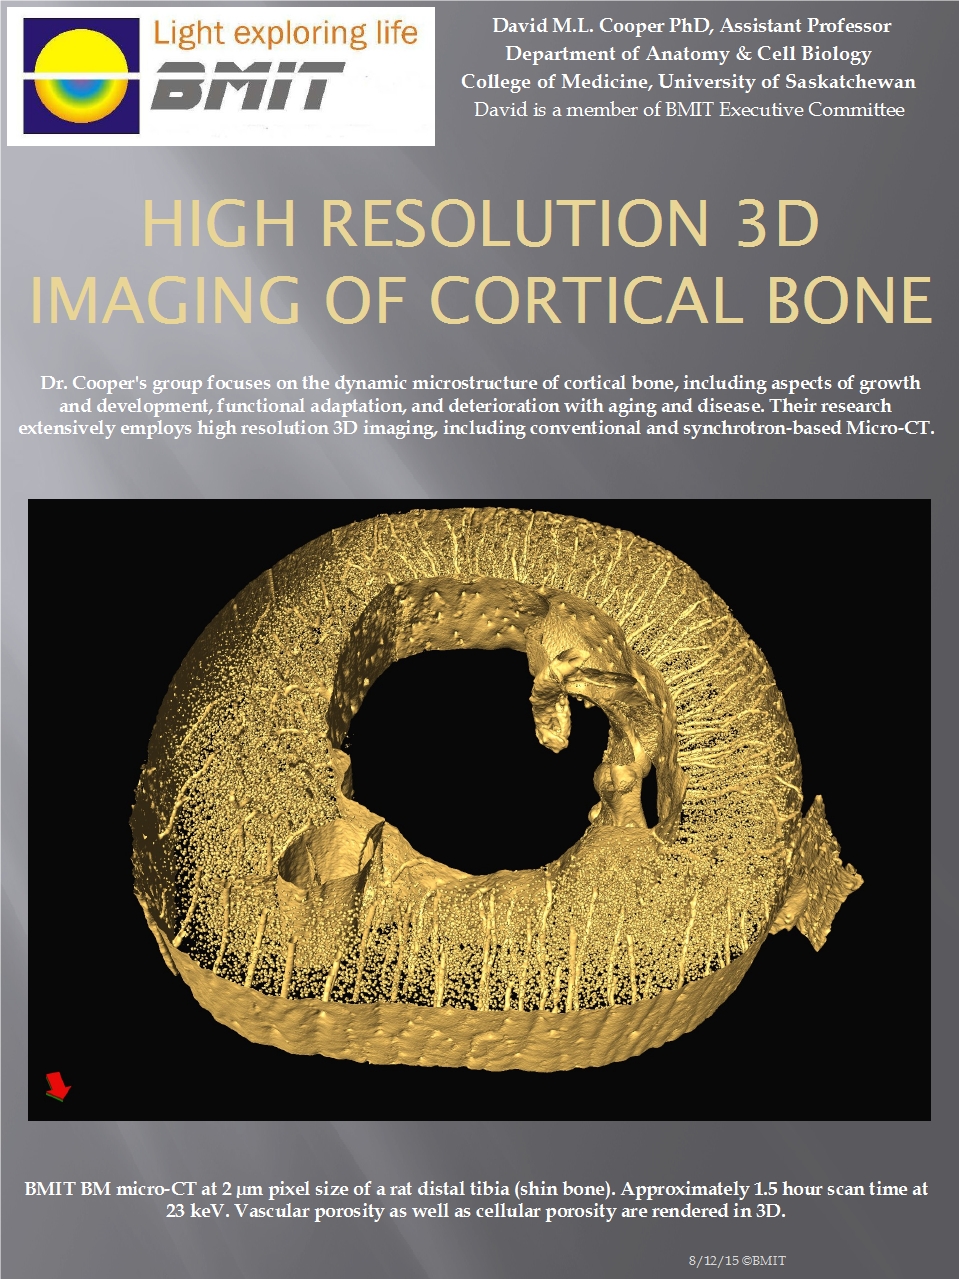 High Resolution 3D Imaging of Cortical Bone Image